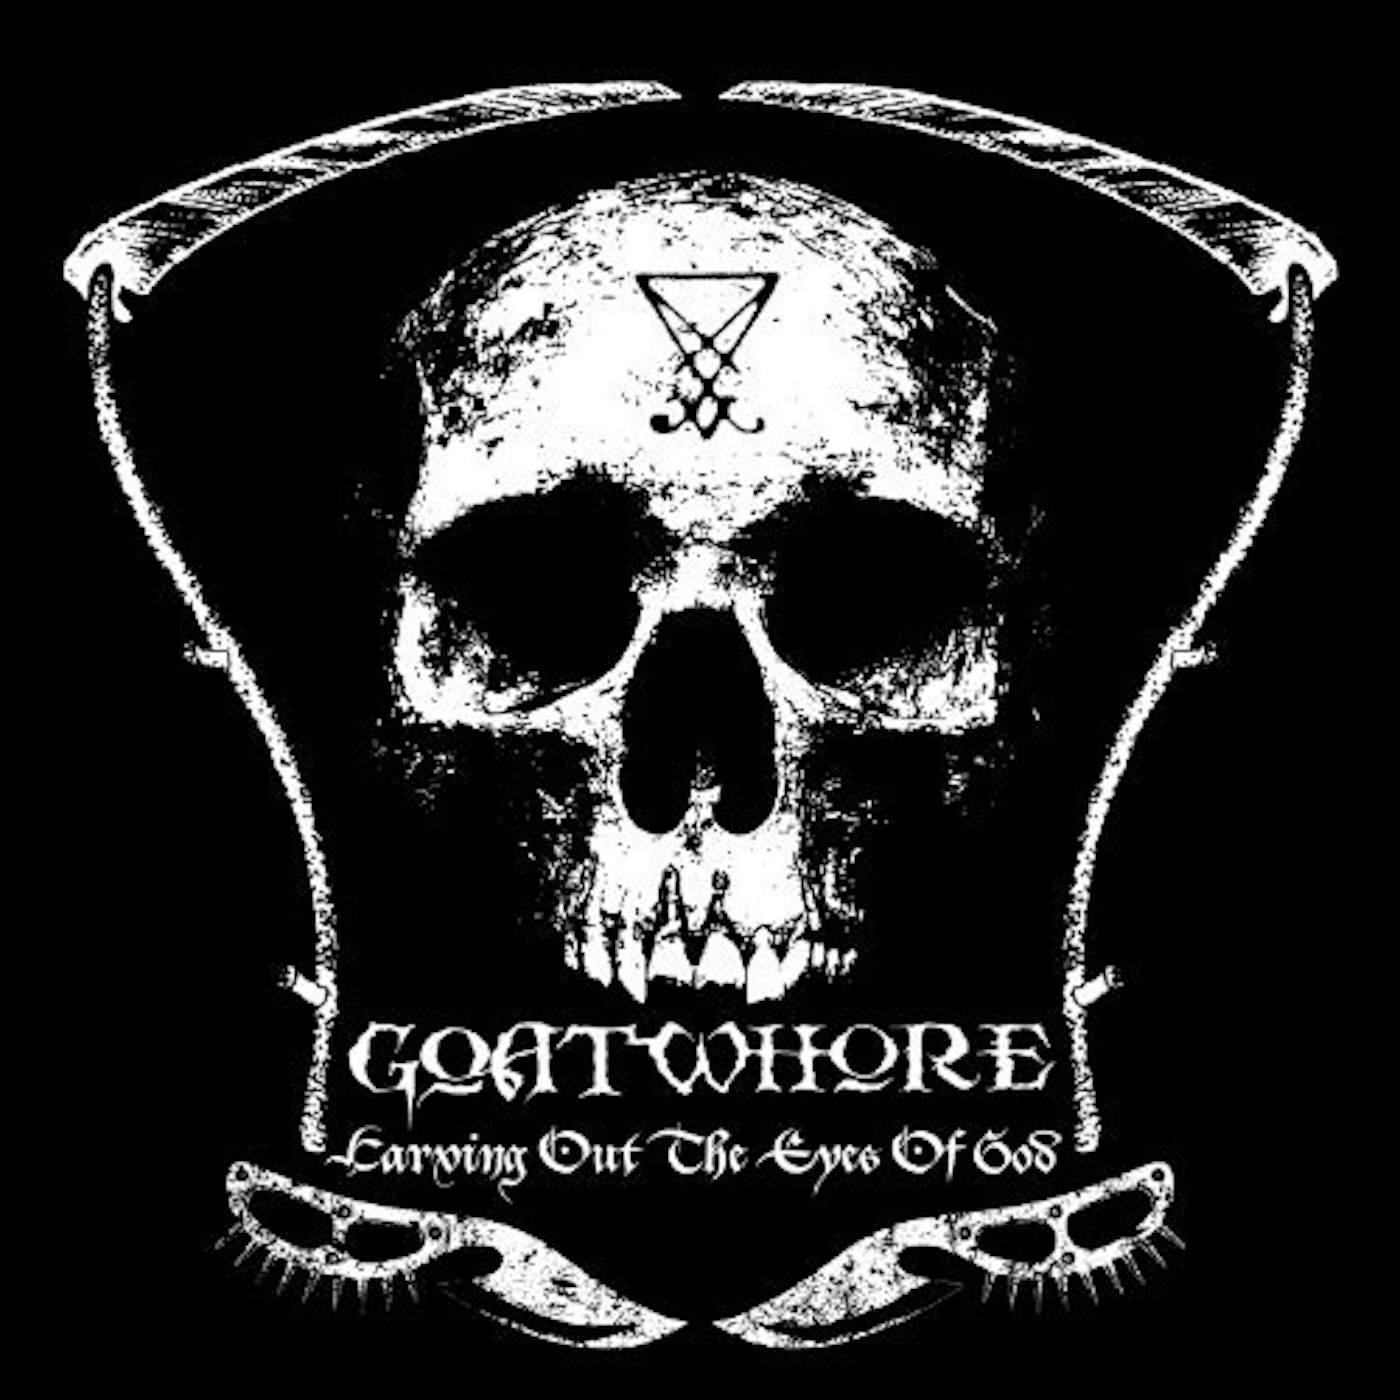 Goatwhore Carving Out The Eyes Of God Vinyl Record